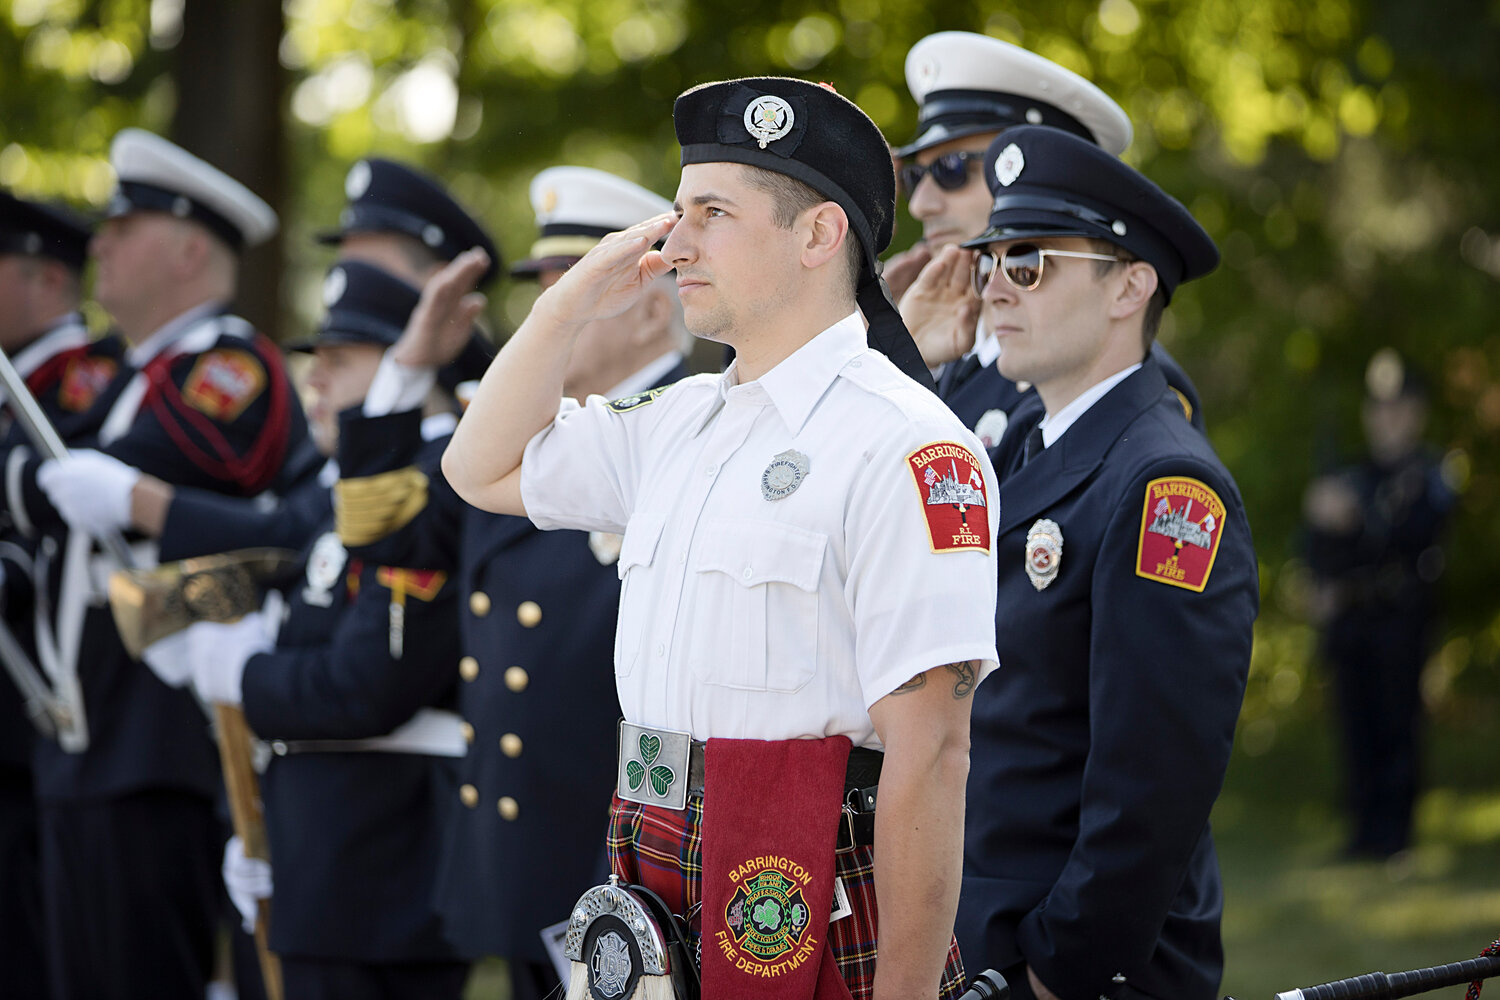 Members of the Barrington Fire Department salute the flag while TAPS is played.